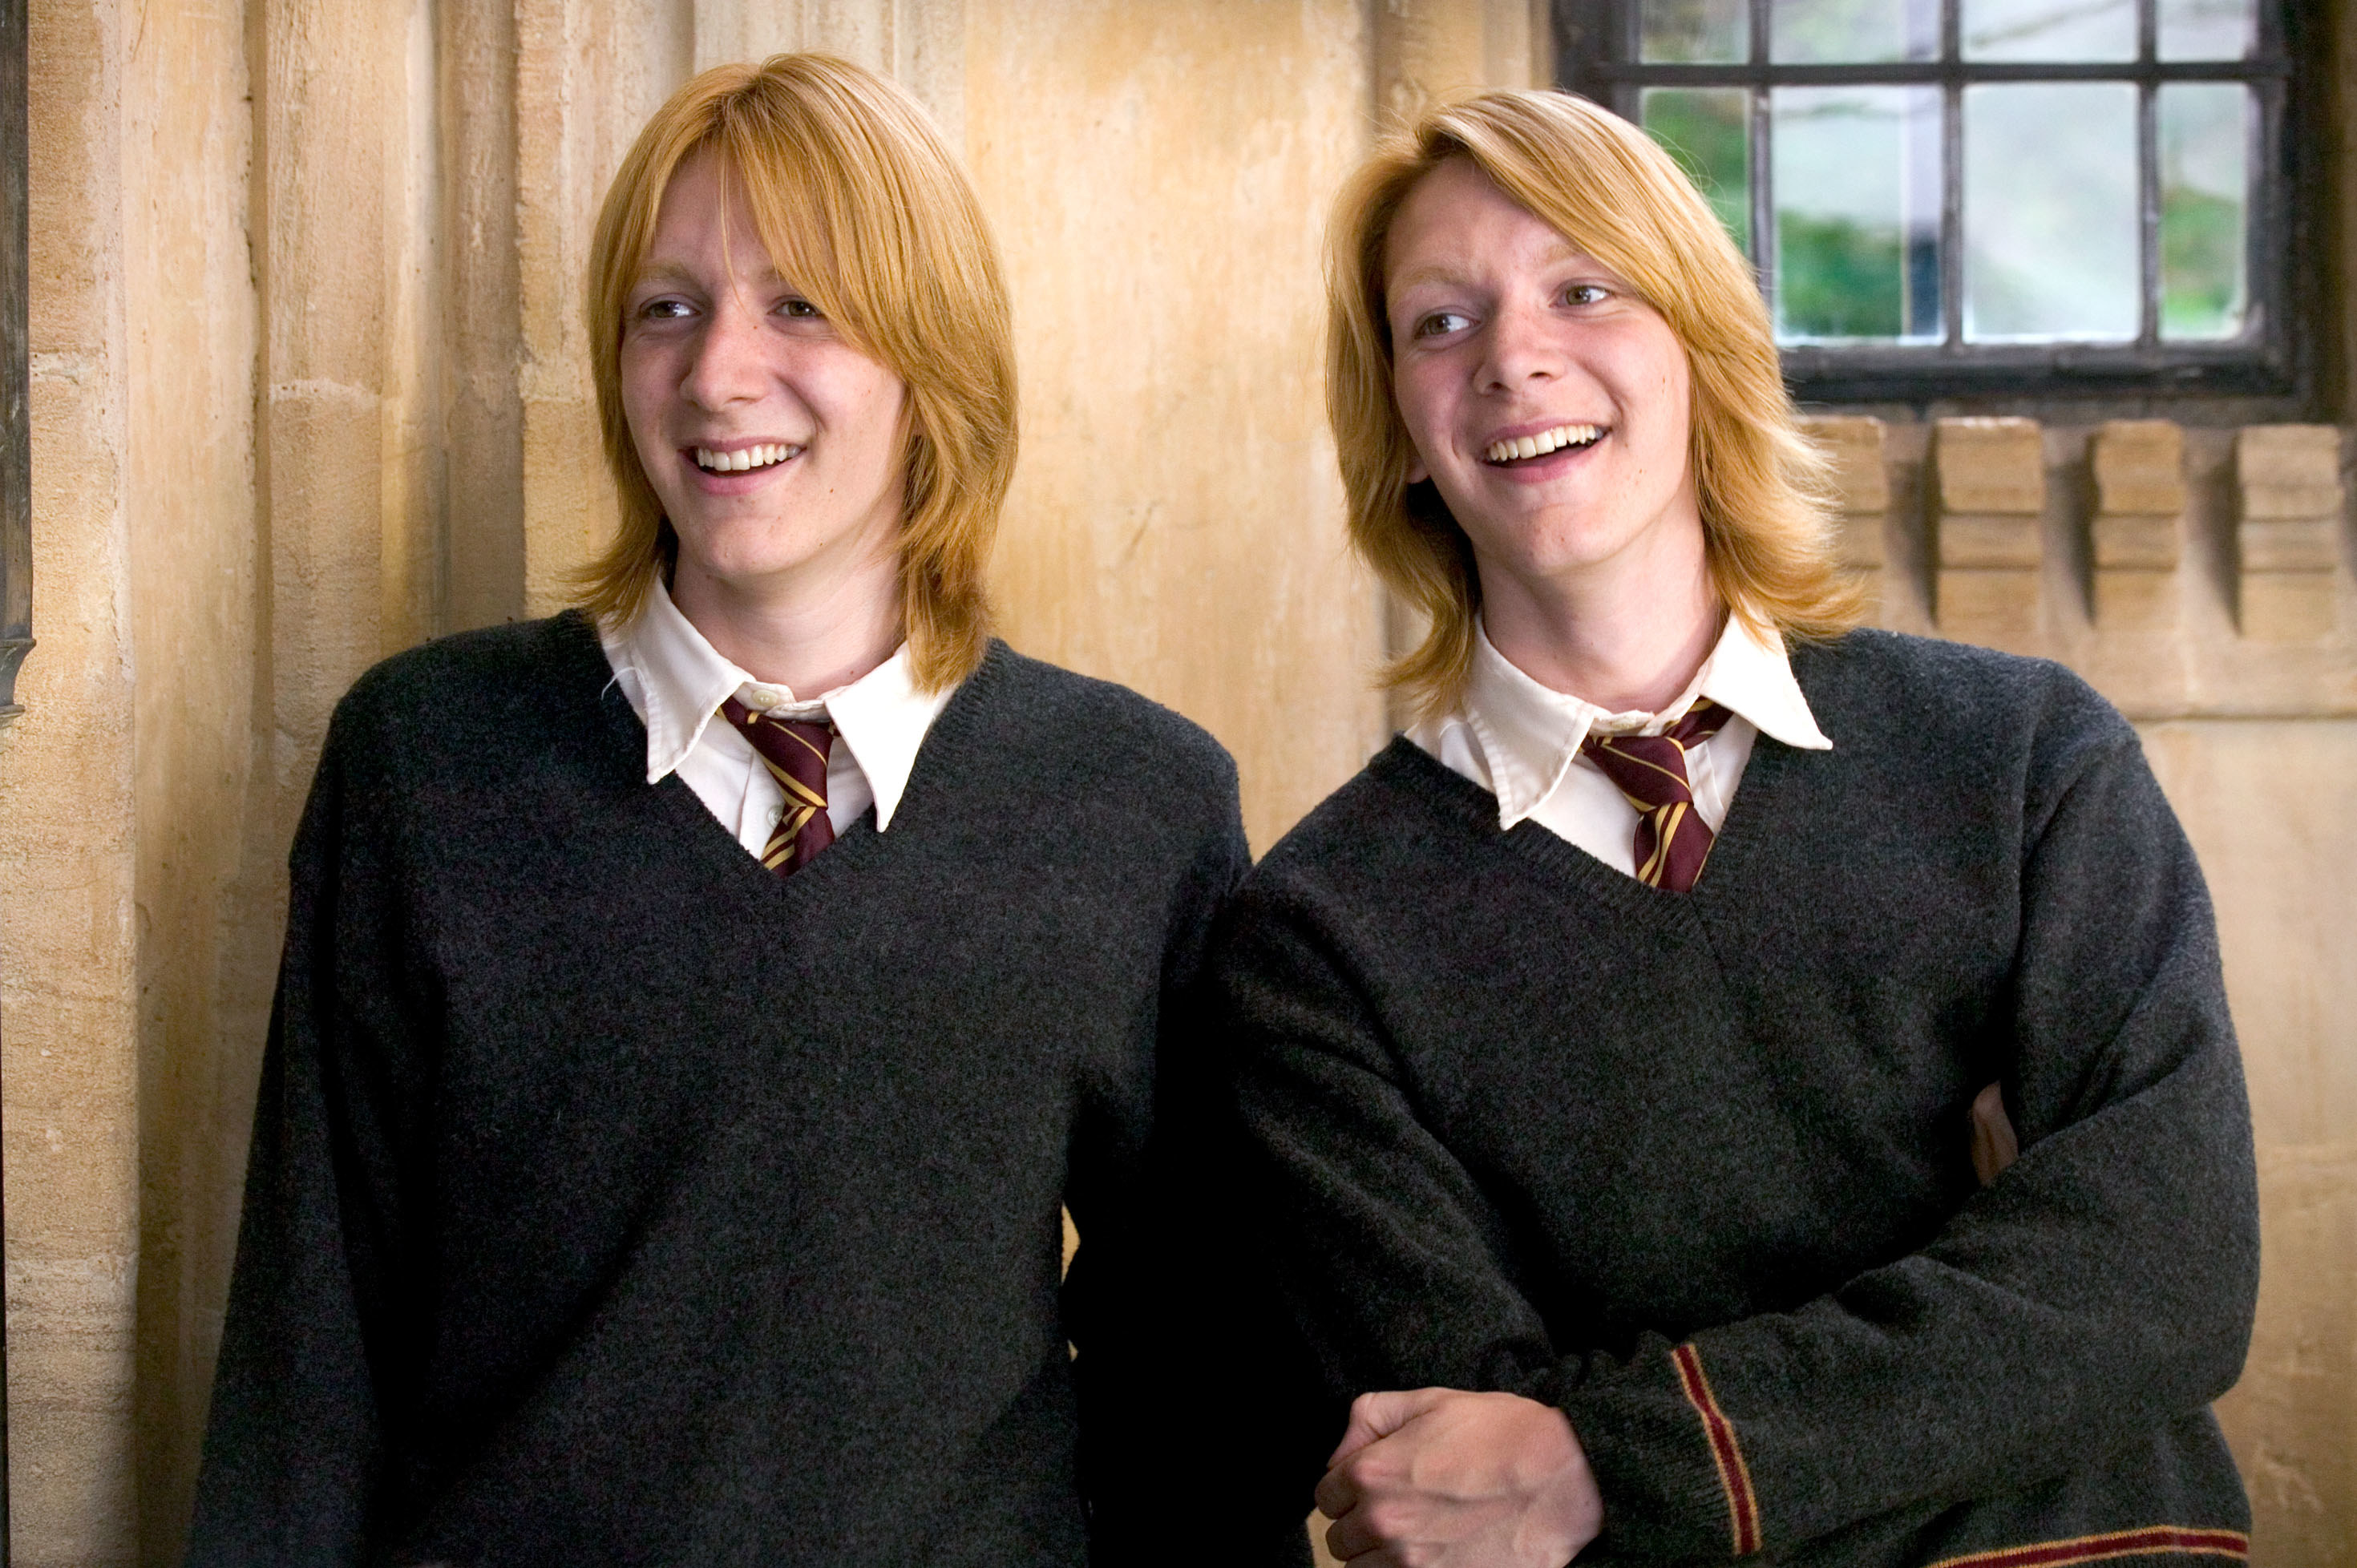 Fred and George smiling together